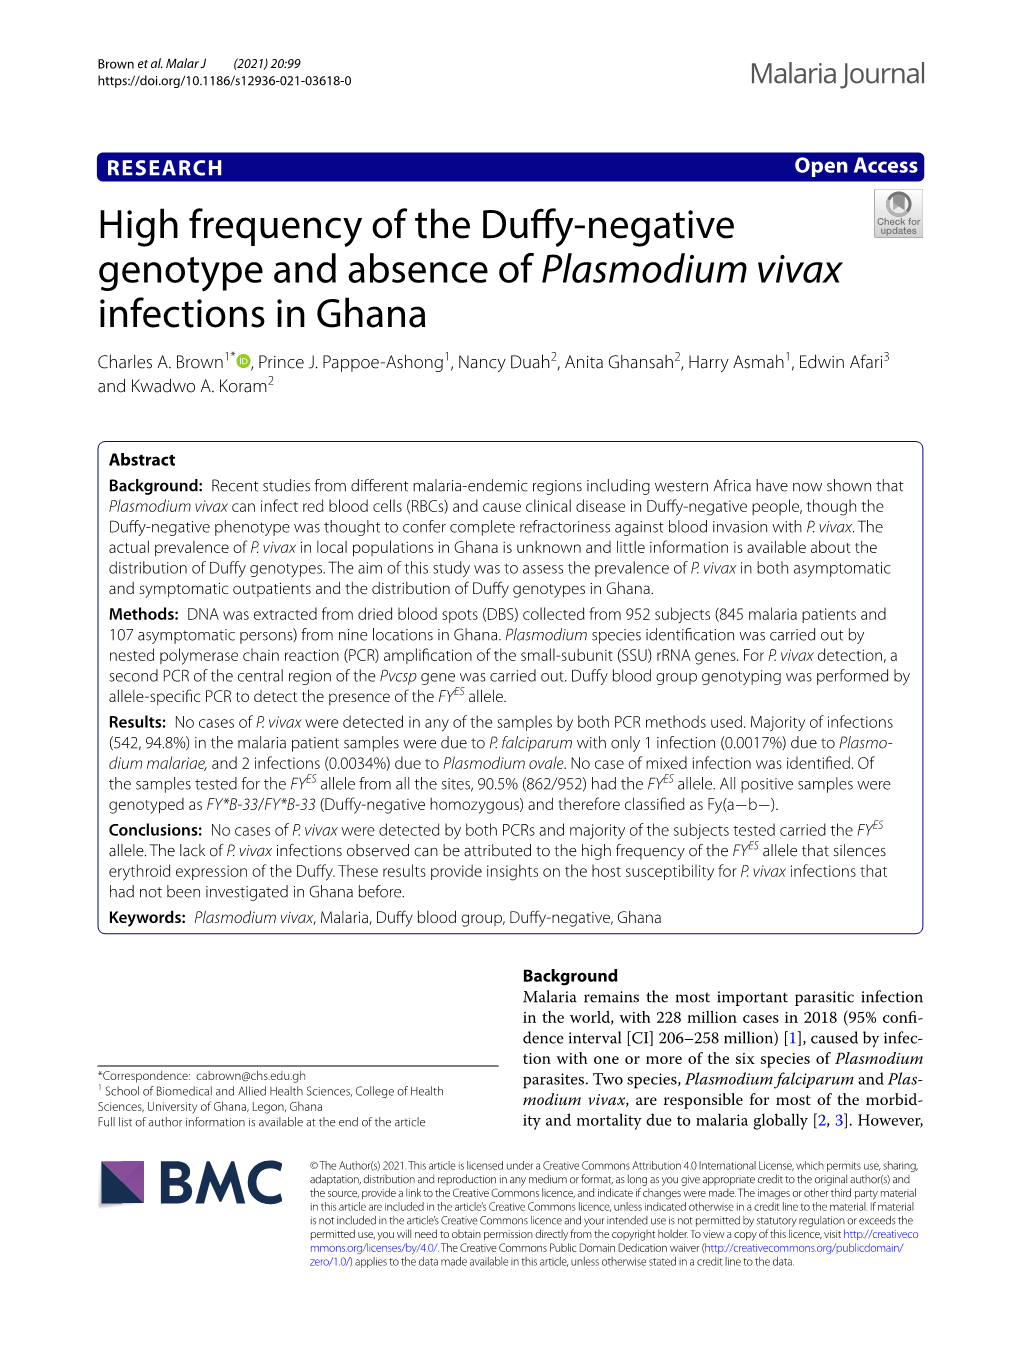 High Frequency of the Duffy-Negative Genotype and Absence Of